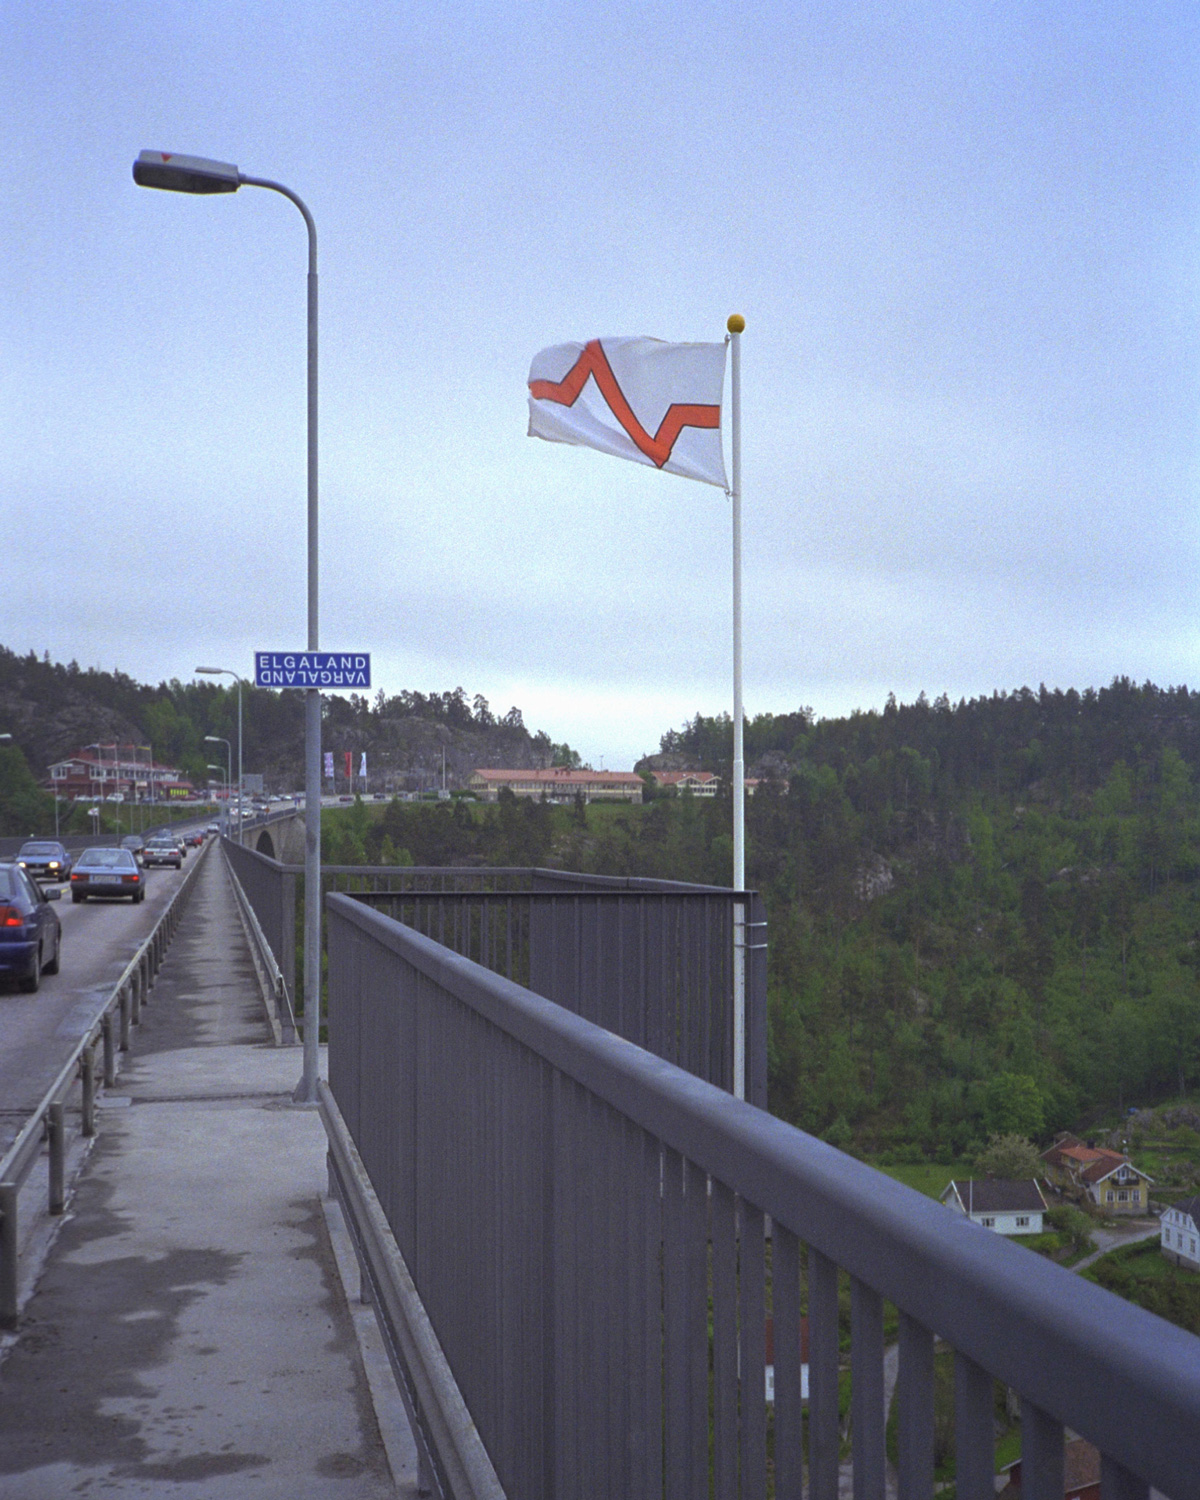 A photograph of a flag on the edge of a highway that marks Elgaland-Vargaland’s physical territory, Svinesund, on the border between Sweden and Norway.